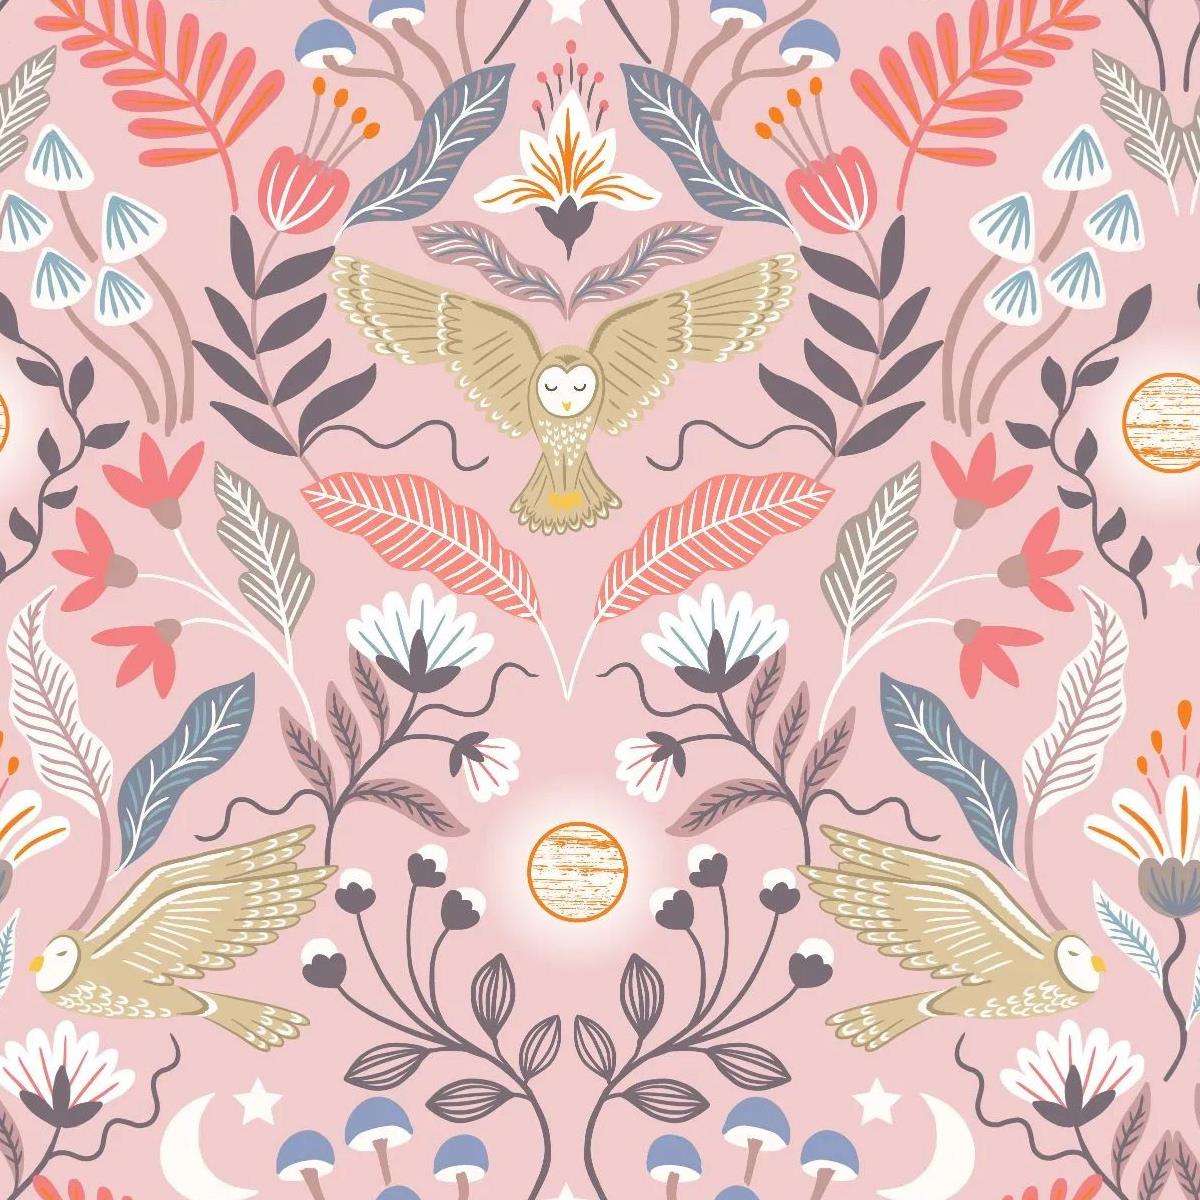 /images/product-images/2020images/FashionFabric/CraftCotton/LINov21/A547.1-Enchanted-owl-on-pink-with-copper-metallic.jpg